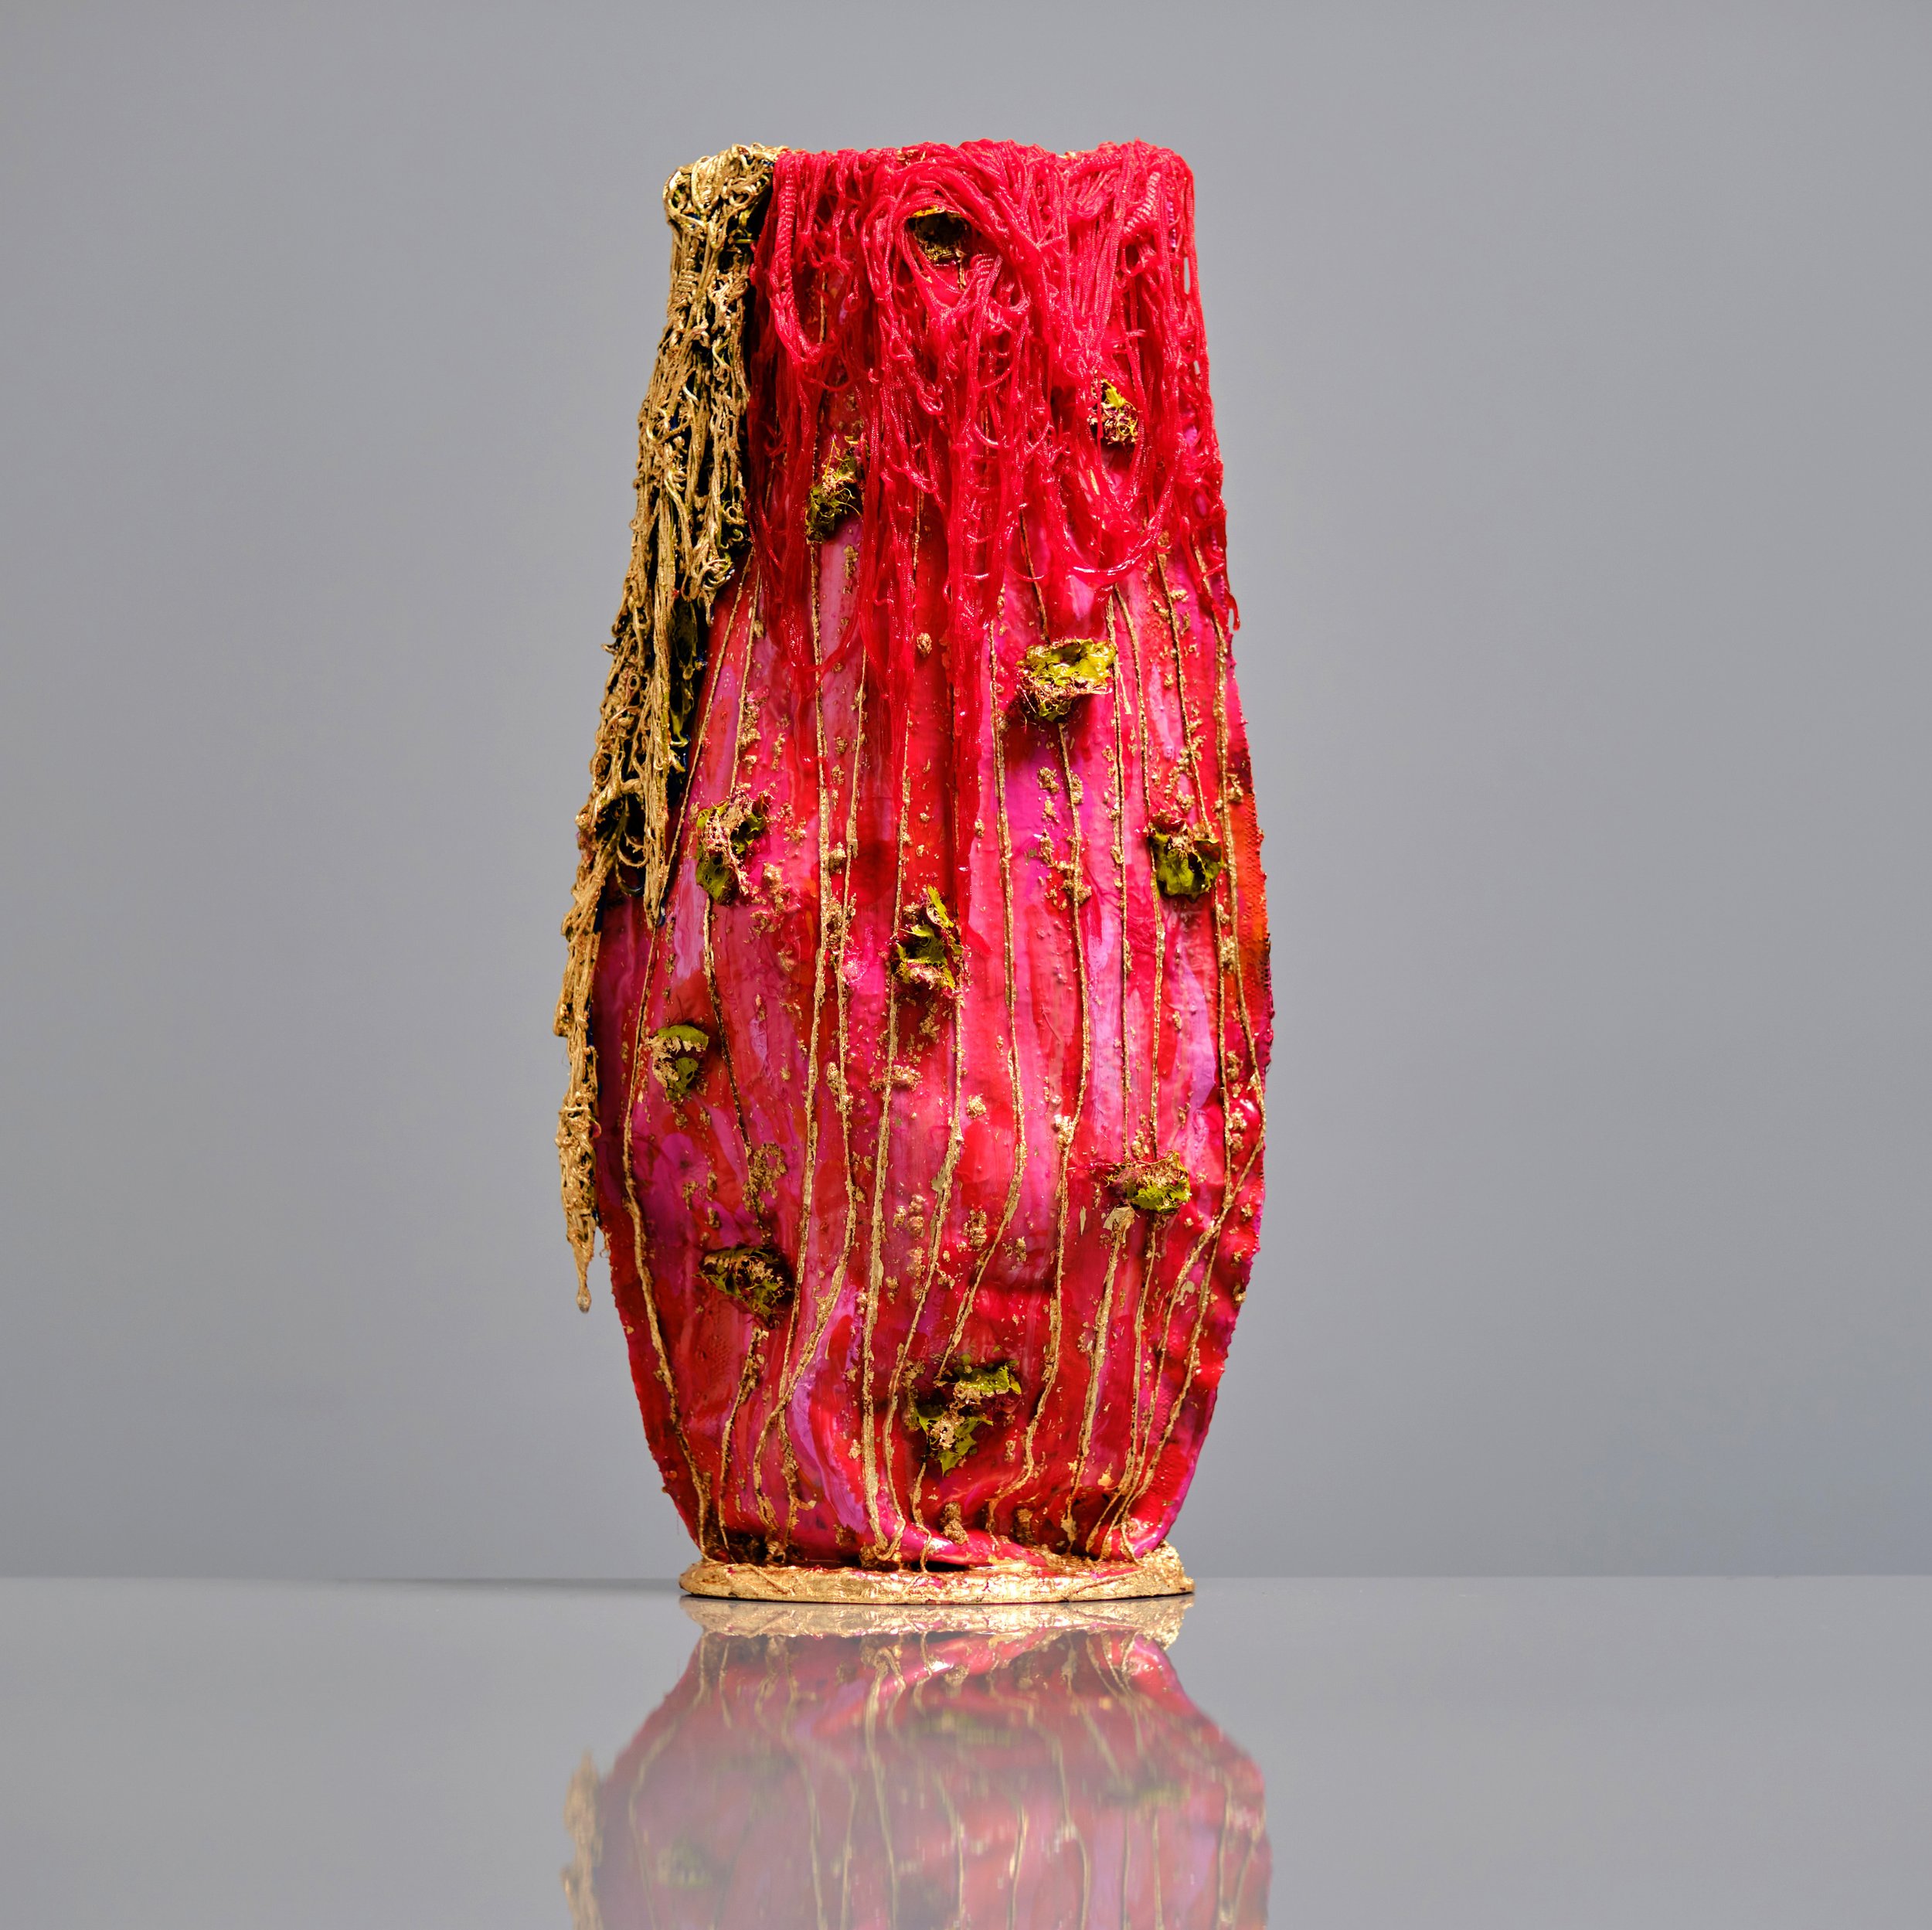   Botanica Exotica #7 SOLD Price:  $3300  Dimensions:  300 x 640 x 180mm  Materials:  Fabric, resin, acrylic paint, mixed media 